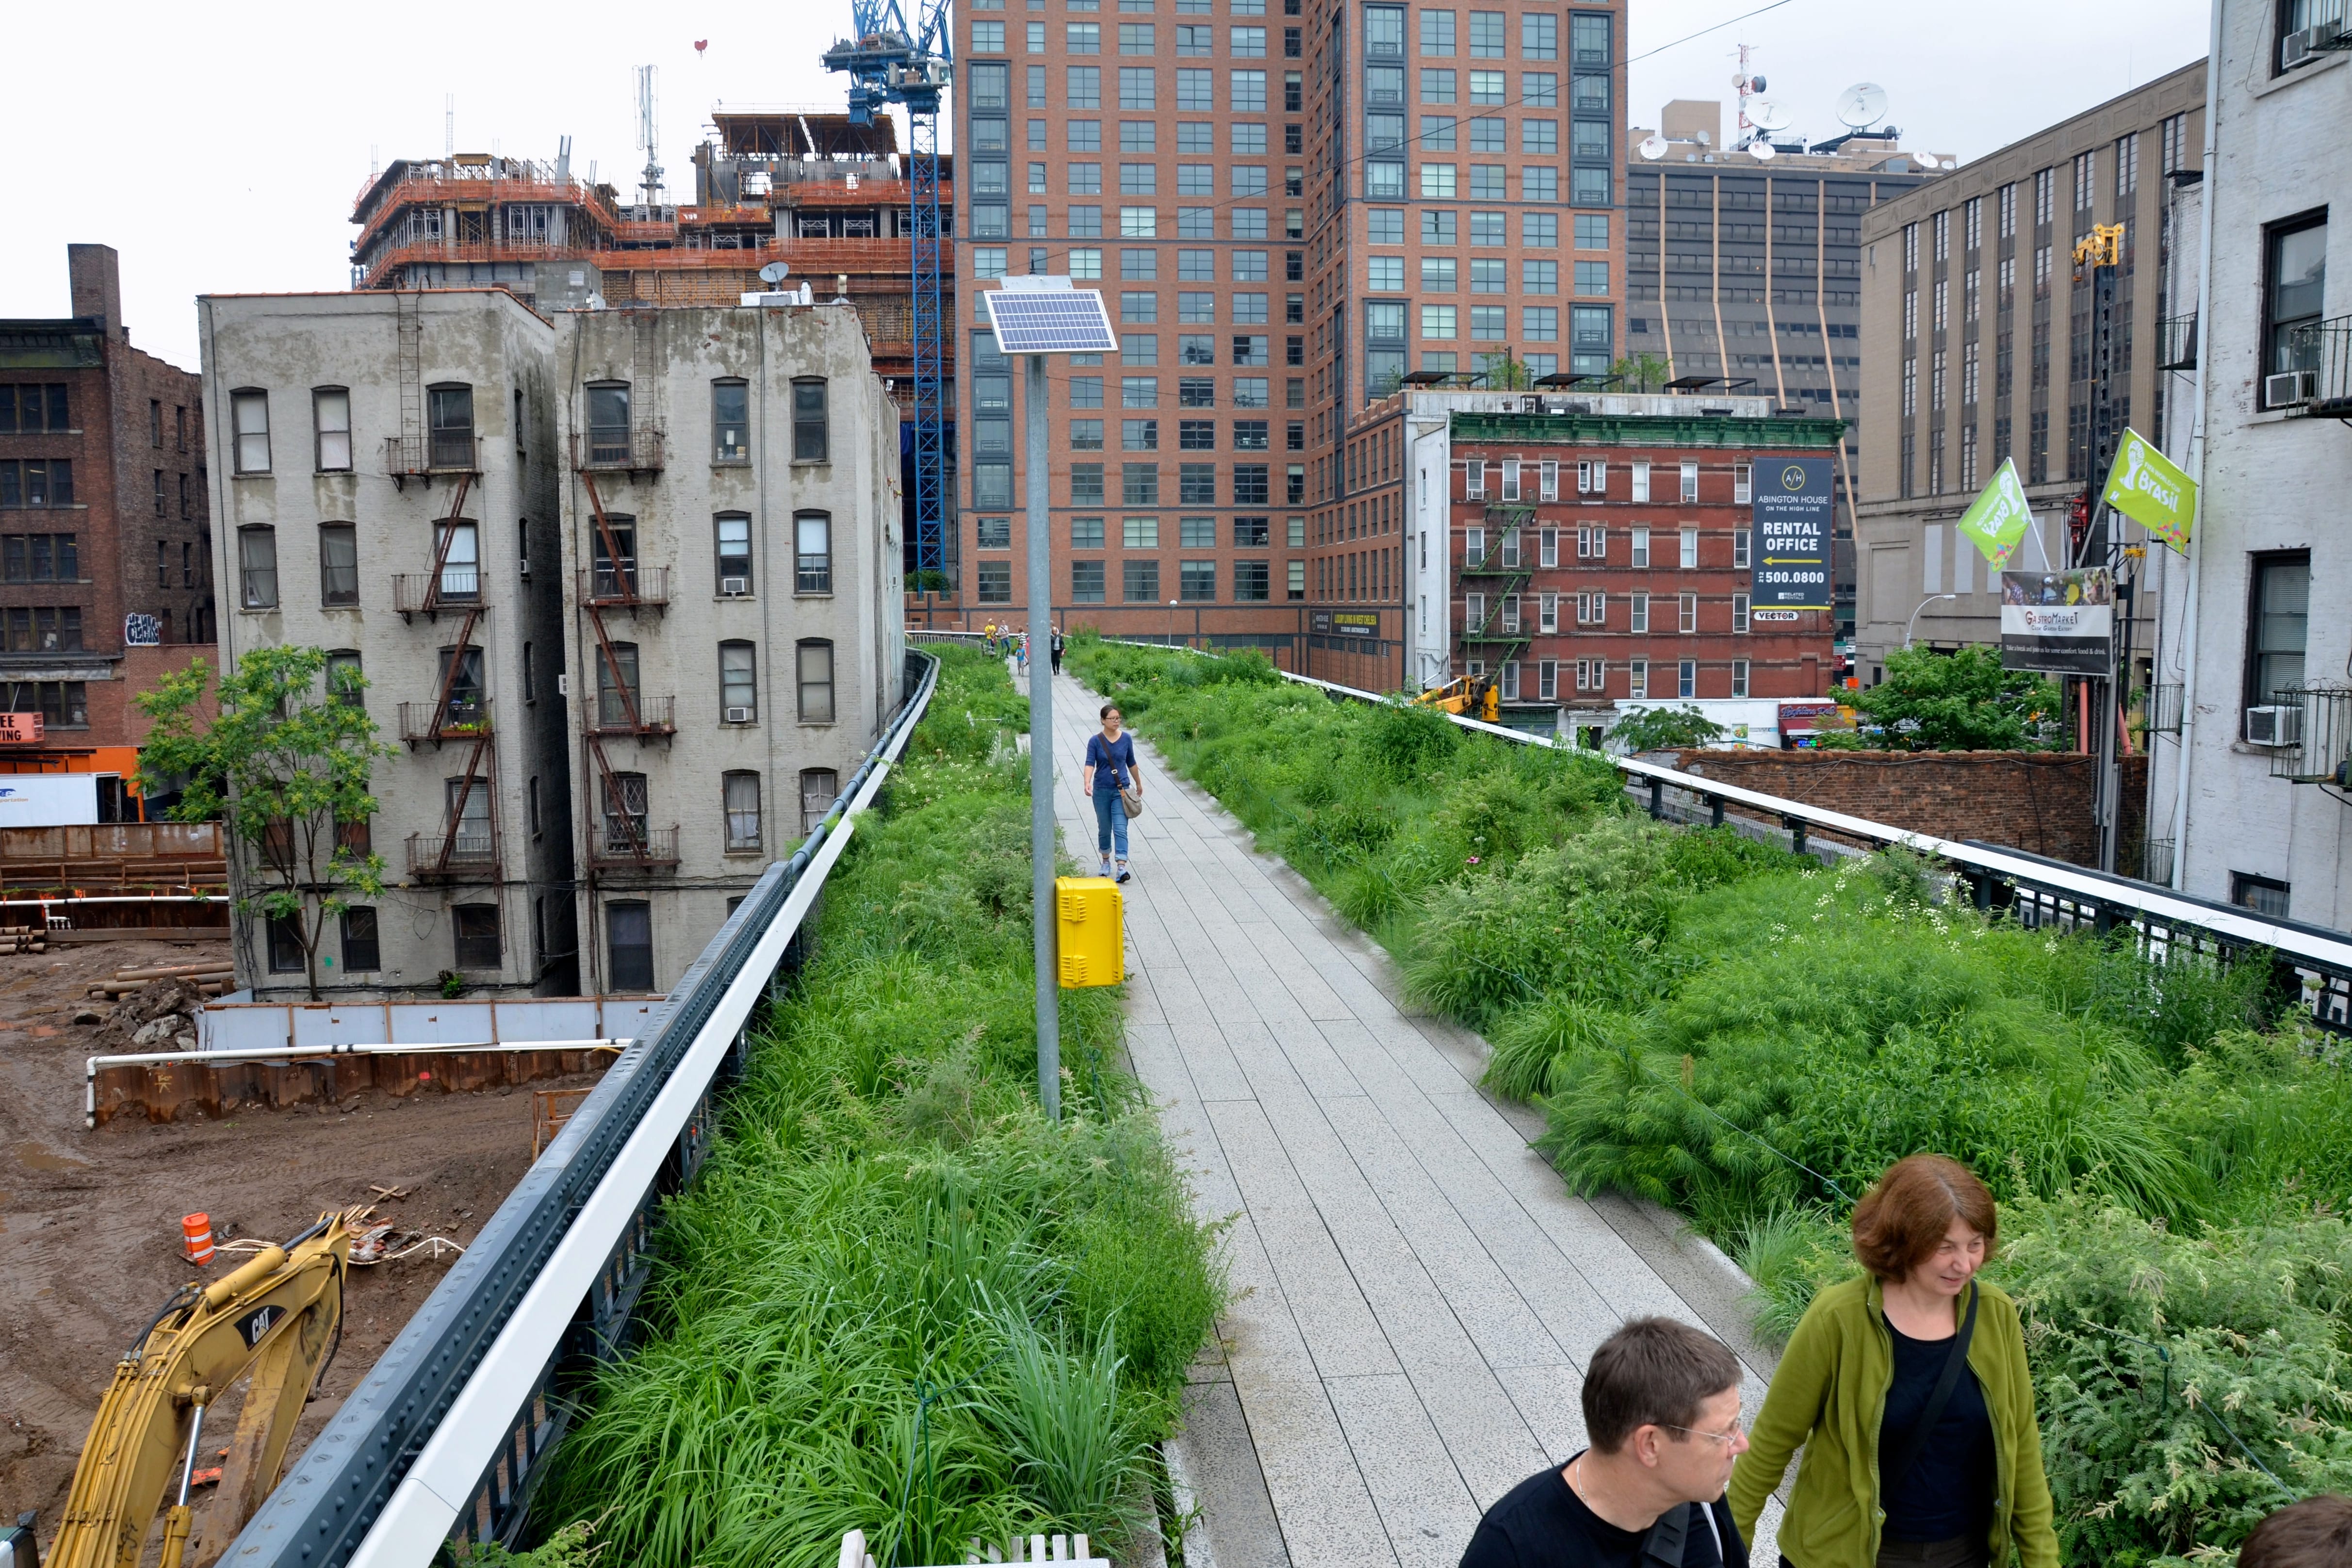 The High Line: A Walk in the Park | DesignDestinations